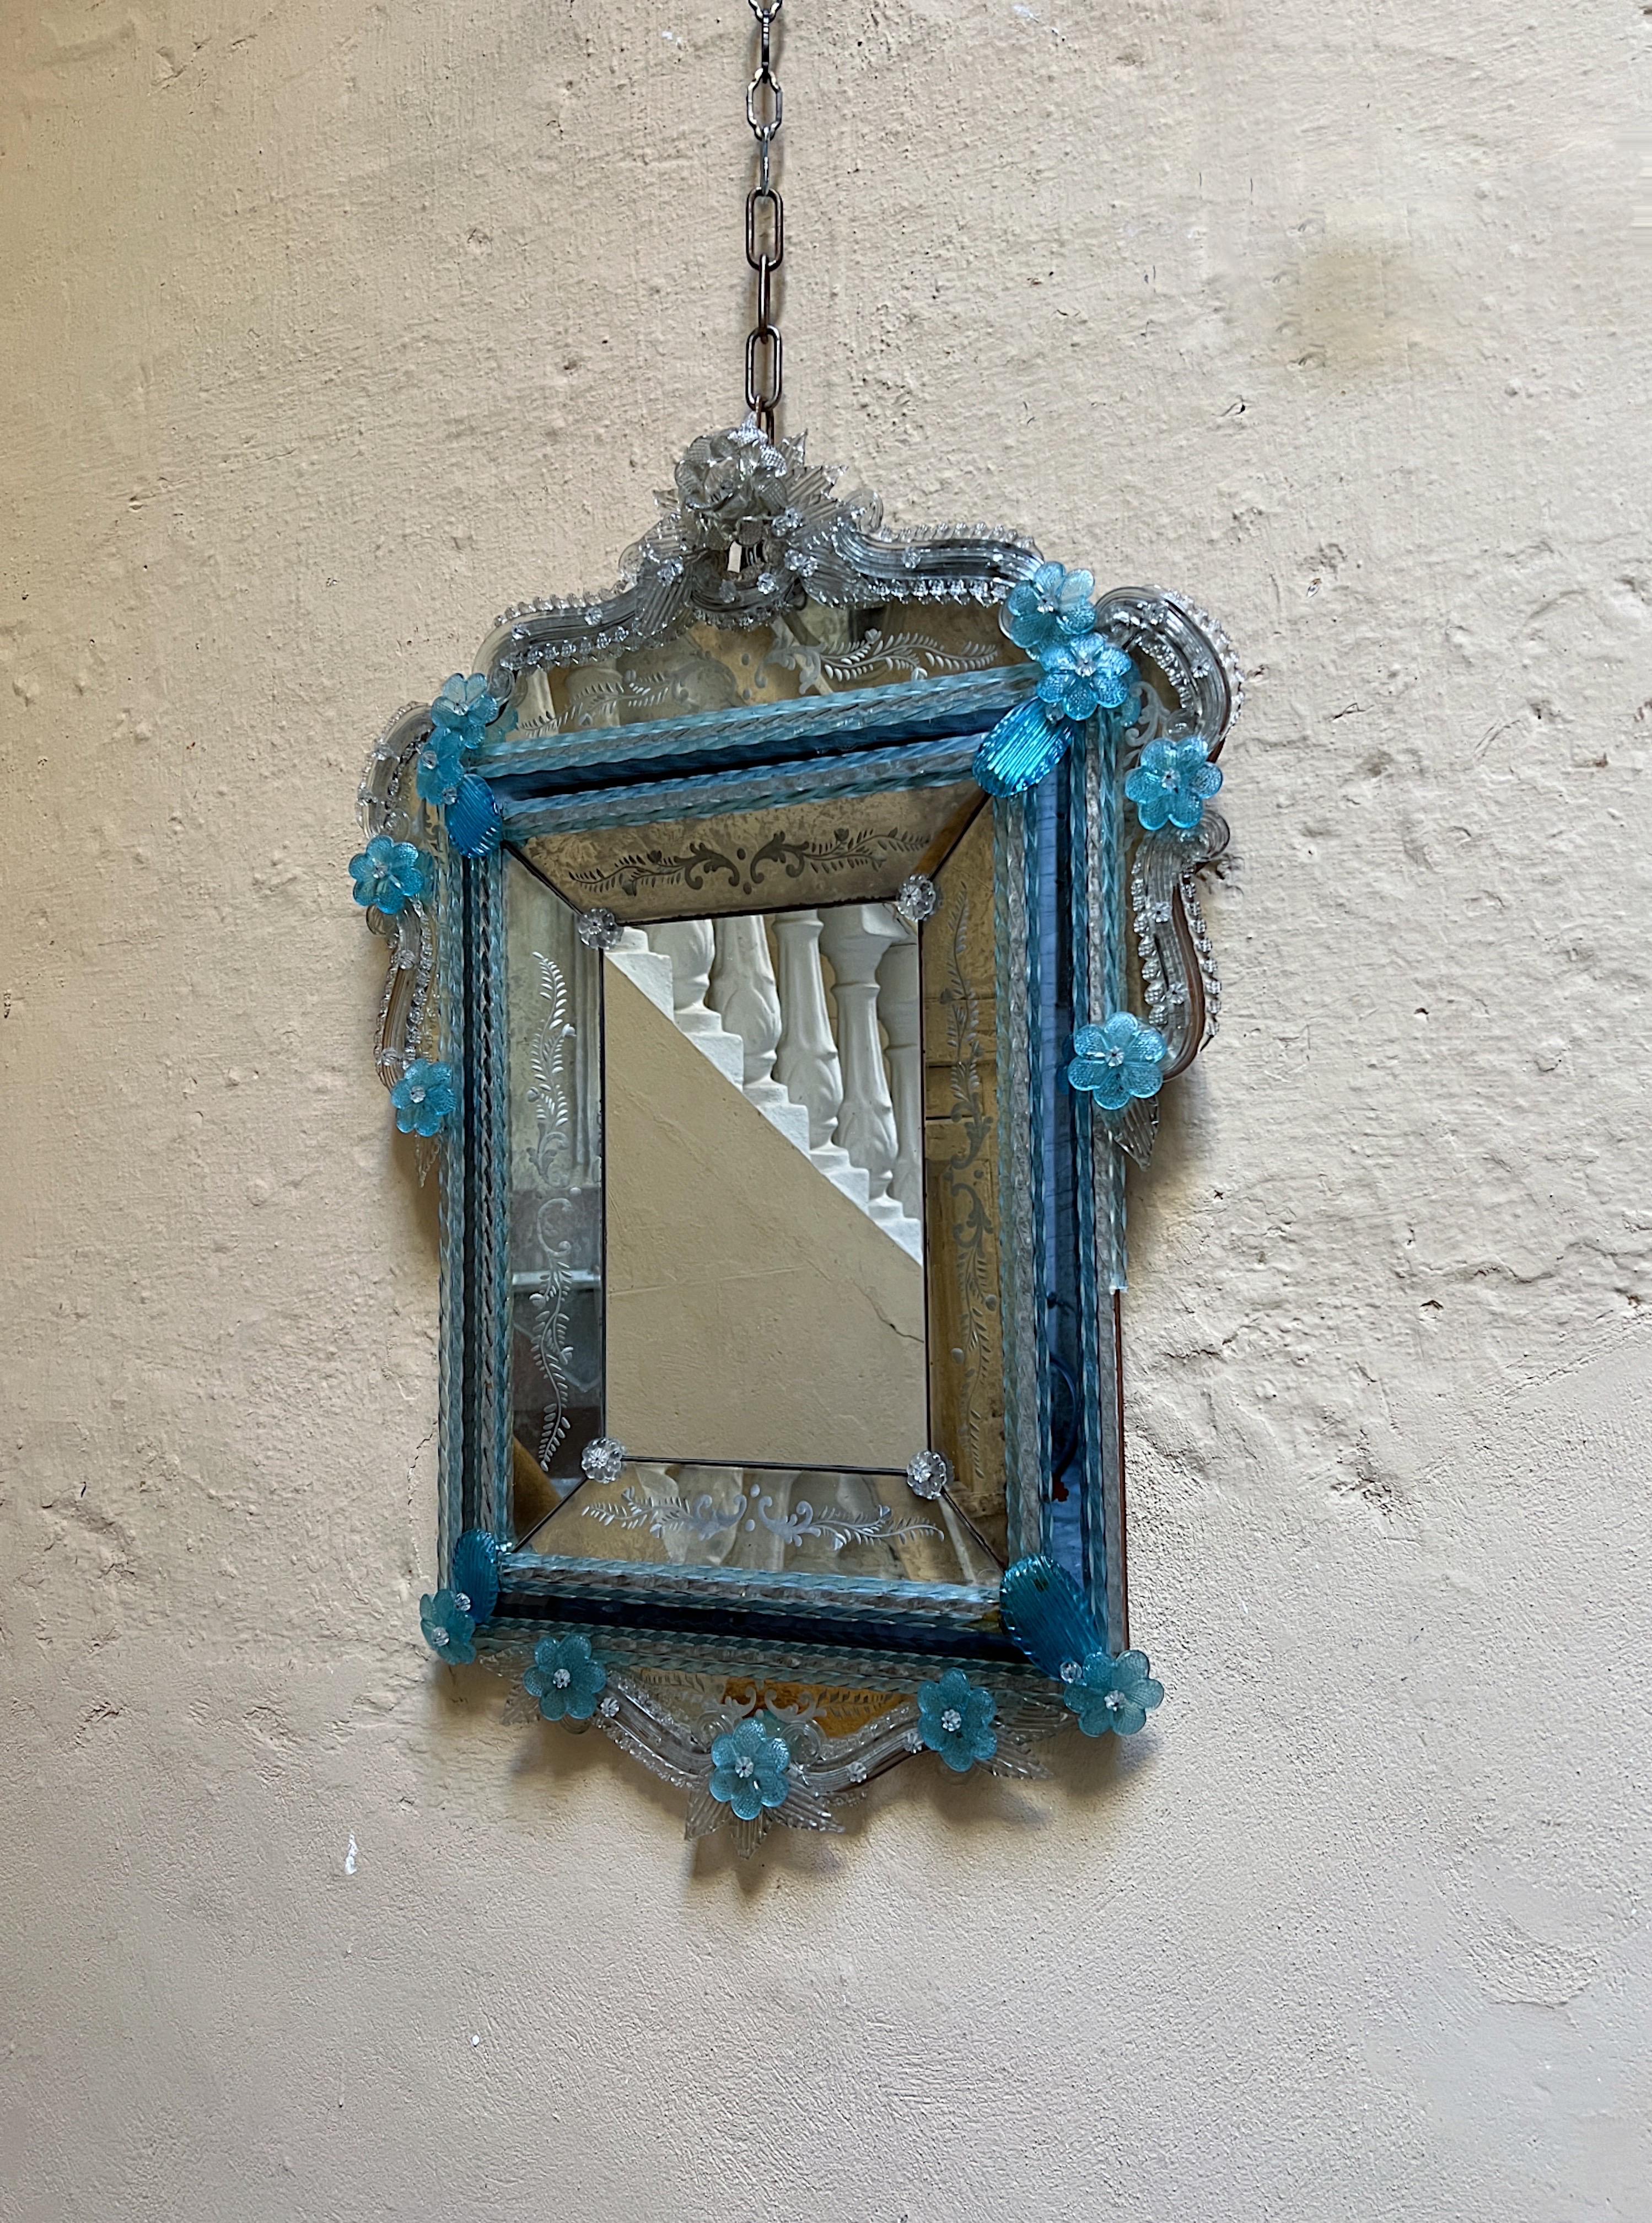 Introducing this Stunning 1920s Blue and Clear Murano Glass Mirror with Florals. 

True vintage elegance with this exquisite 1920s Murano Glass Mirror. Crafted in the famed Murano region of Italy, this mirror showcases a mesmerizing blend of blue